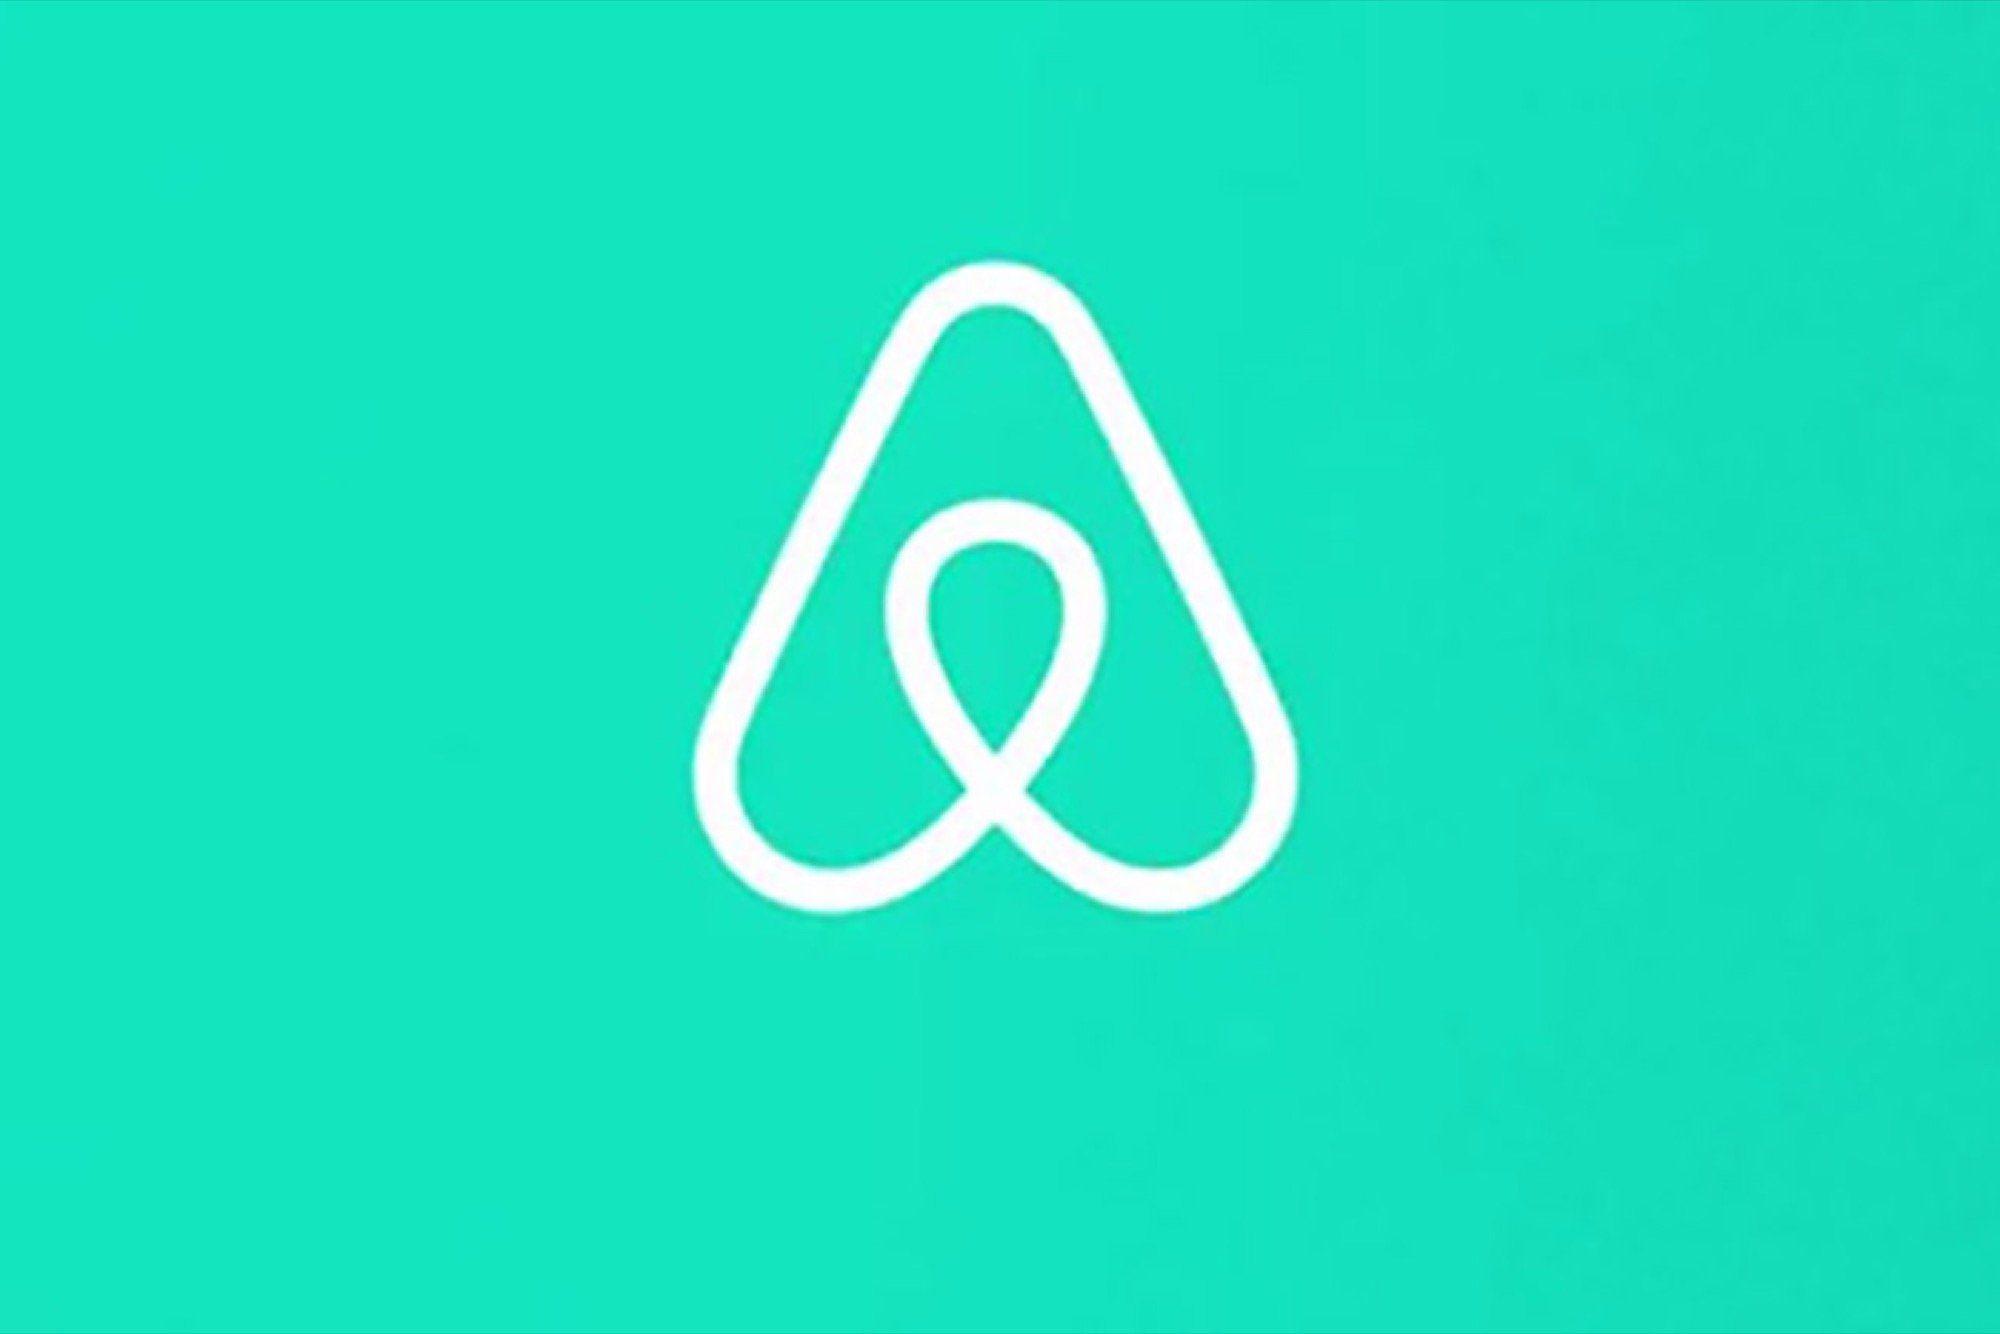 Airbnb New Logo - Love It or Hate It? Airbnb's New Logo Receives Mixed Reactions.